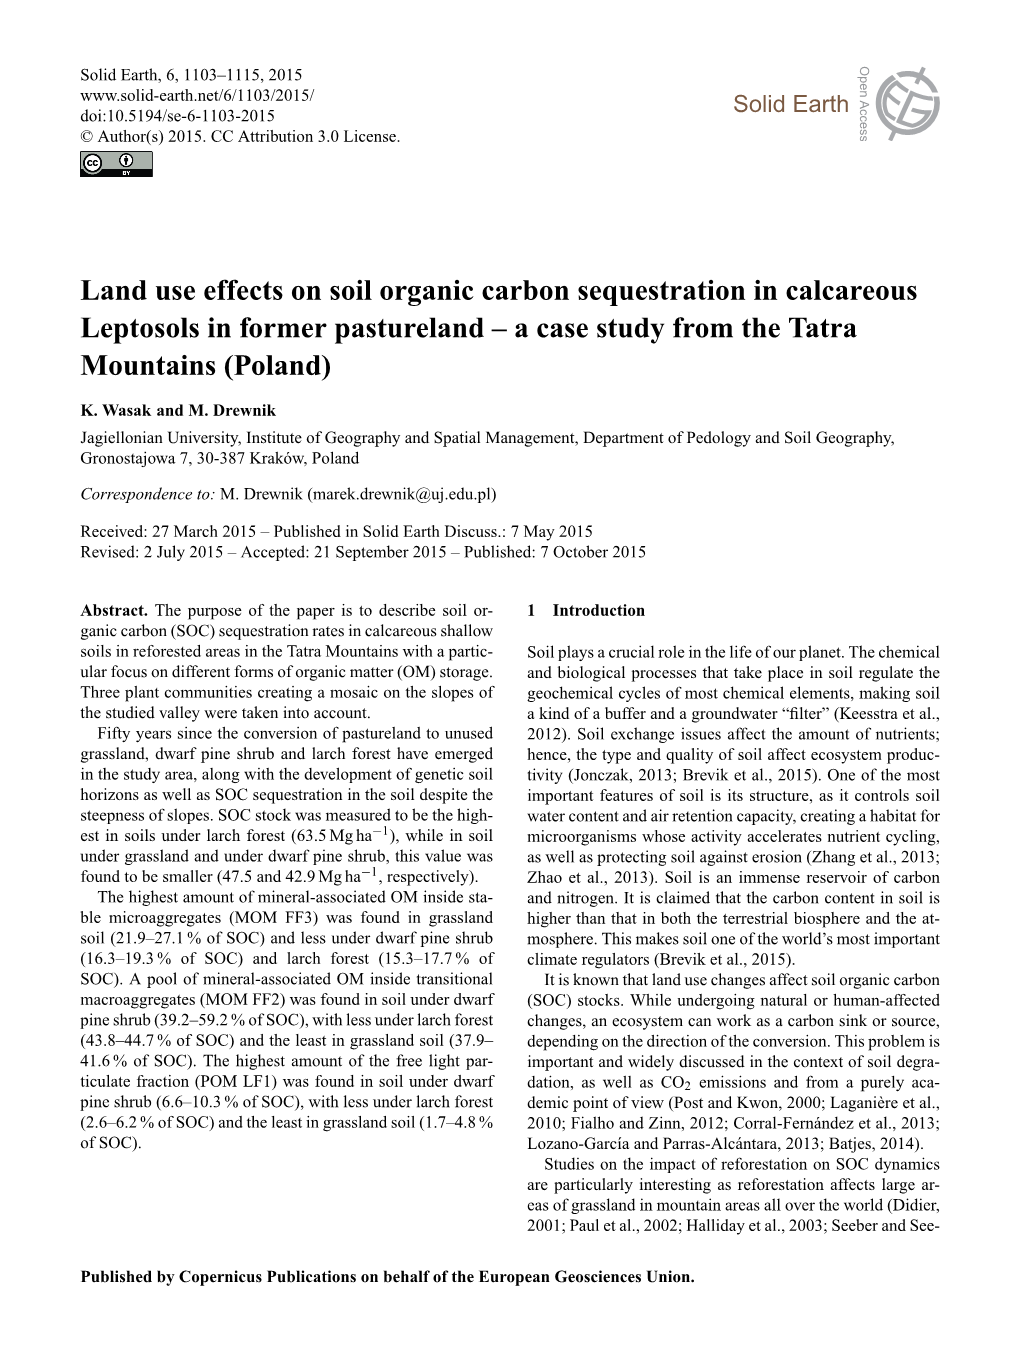 Land Use Effects on Soil Organic Carbon Sequestration in Calcareous Leptosols in Former Pastureland – a Case Study from the Tatra Mountains (Poland)